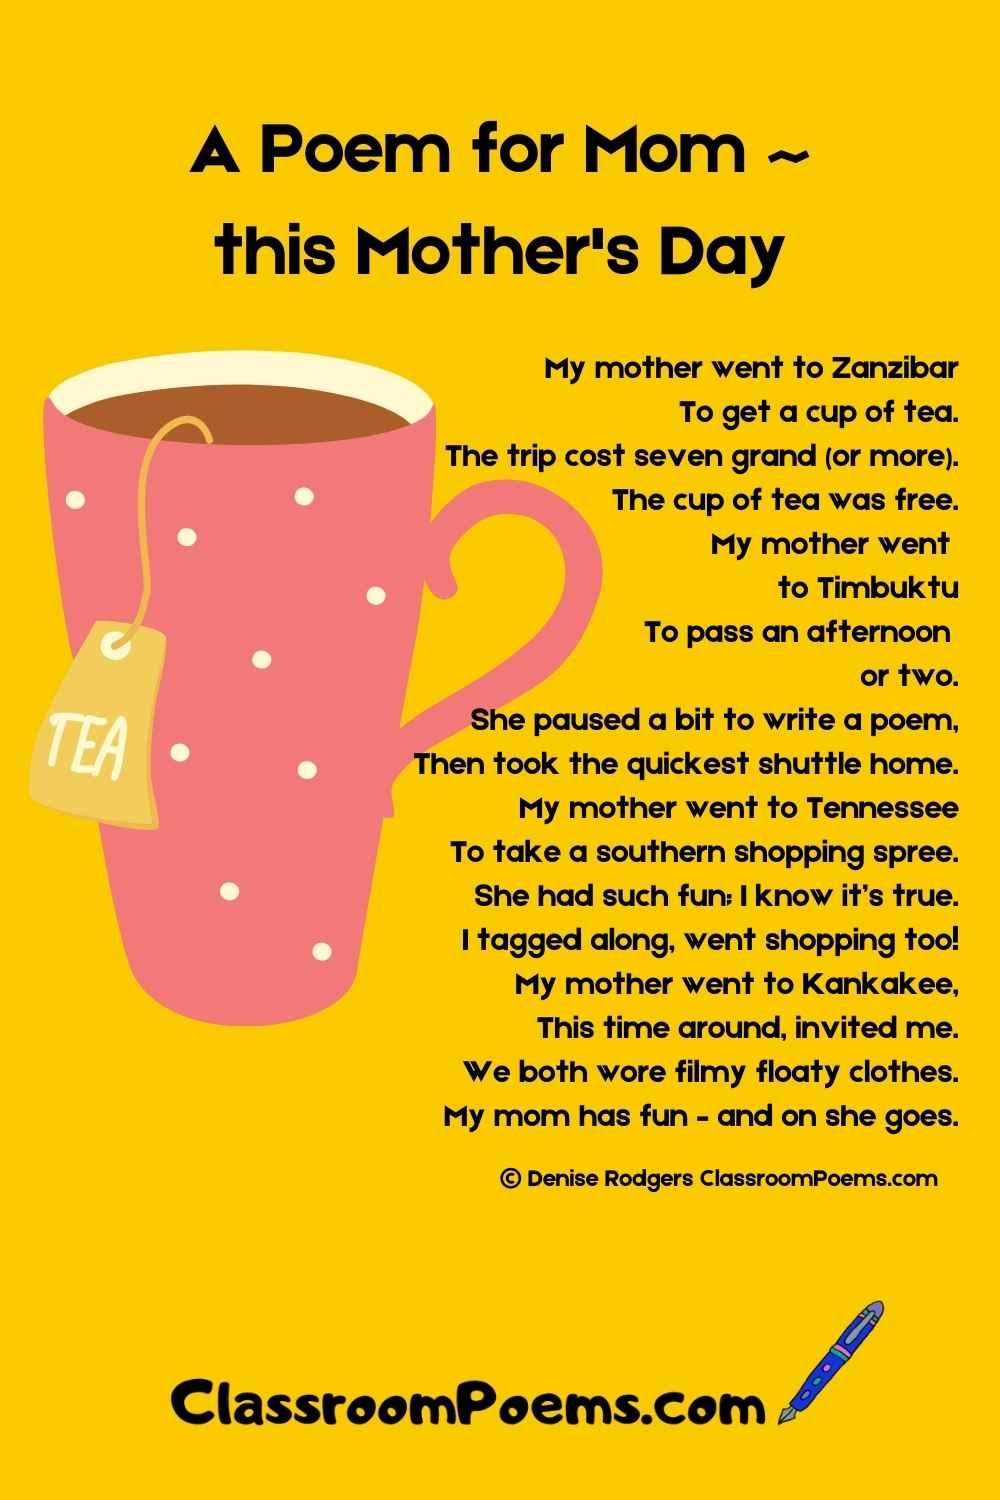 Mothers Day poems for kids by Denise Rodgers on ClassroomPoems.com.